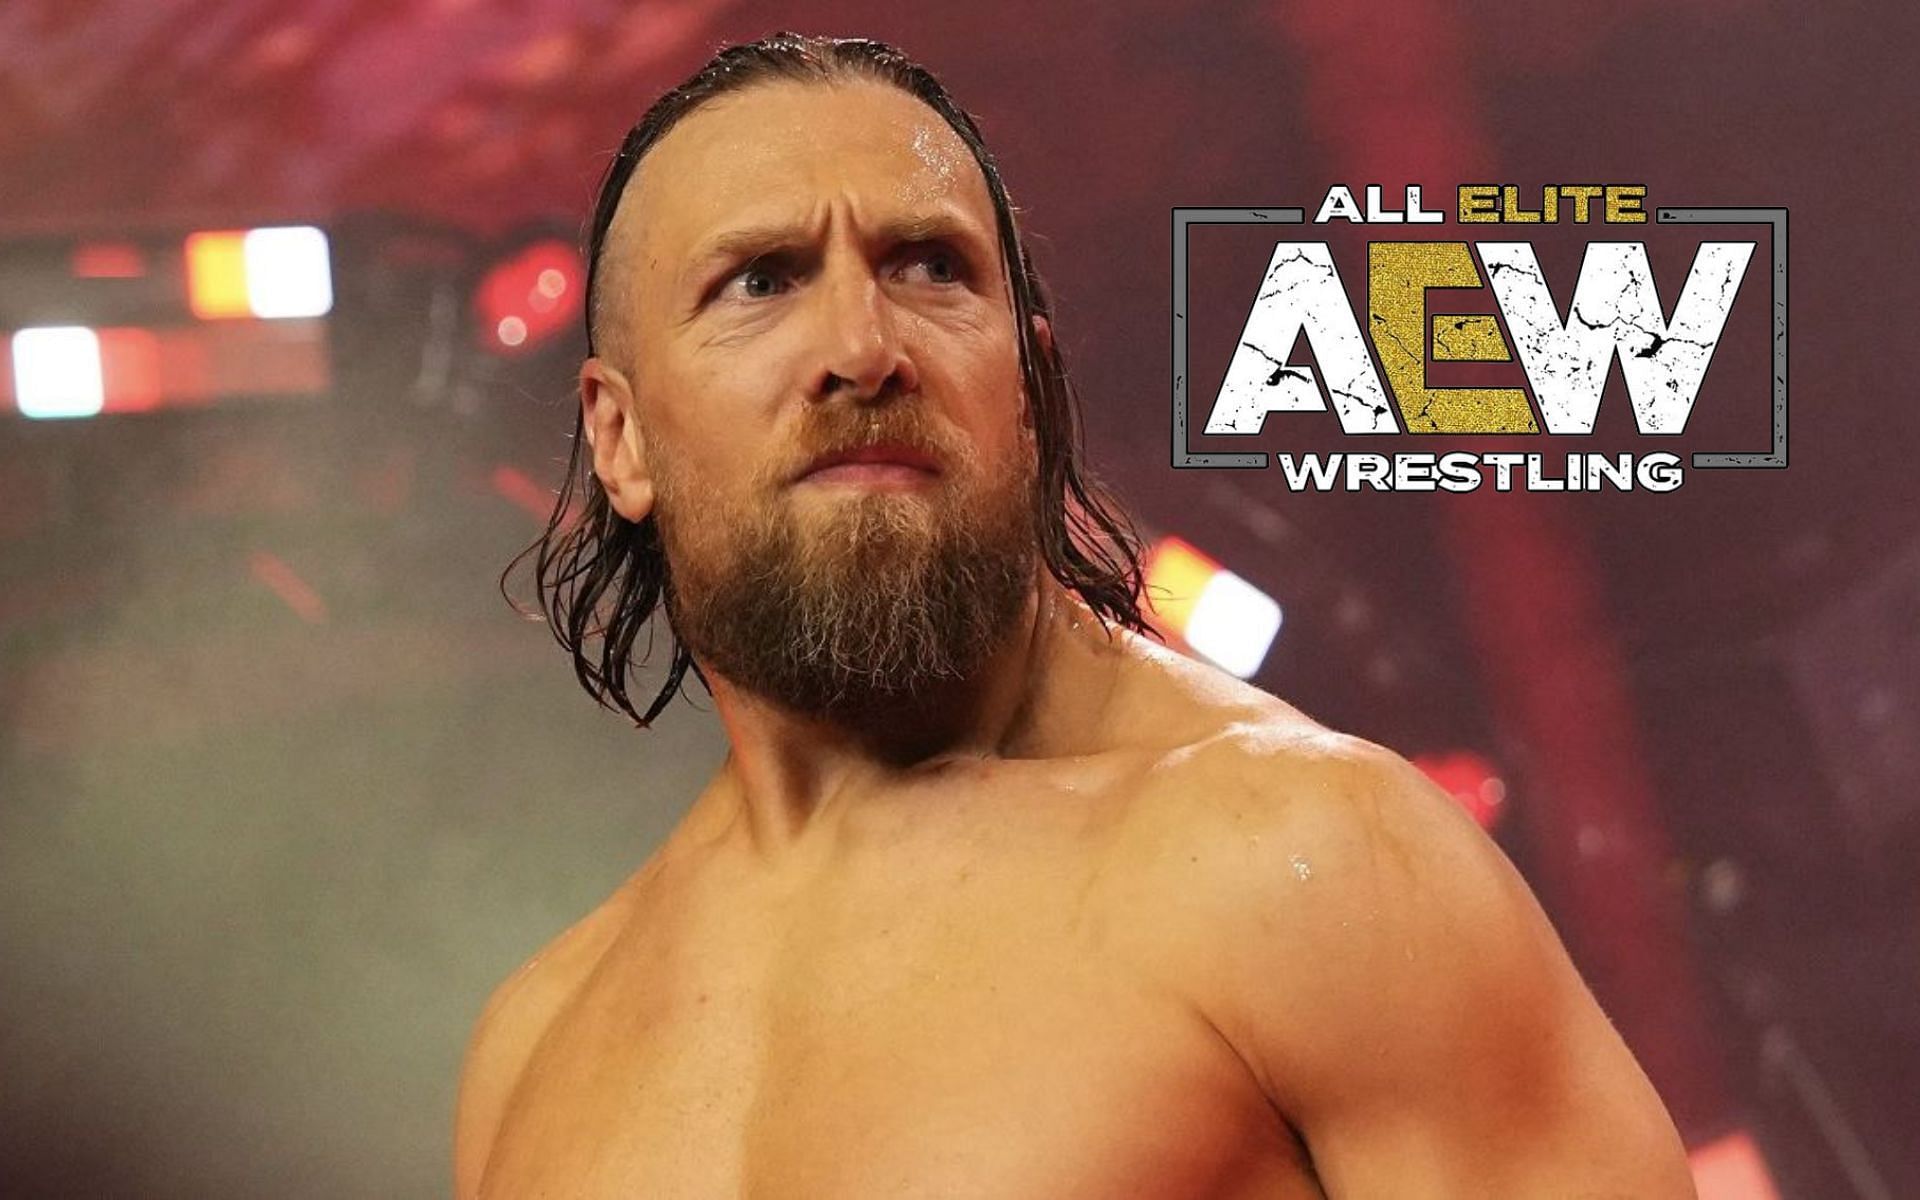 Top AEW star Bryan Danielson was in action last night on Dynamite.